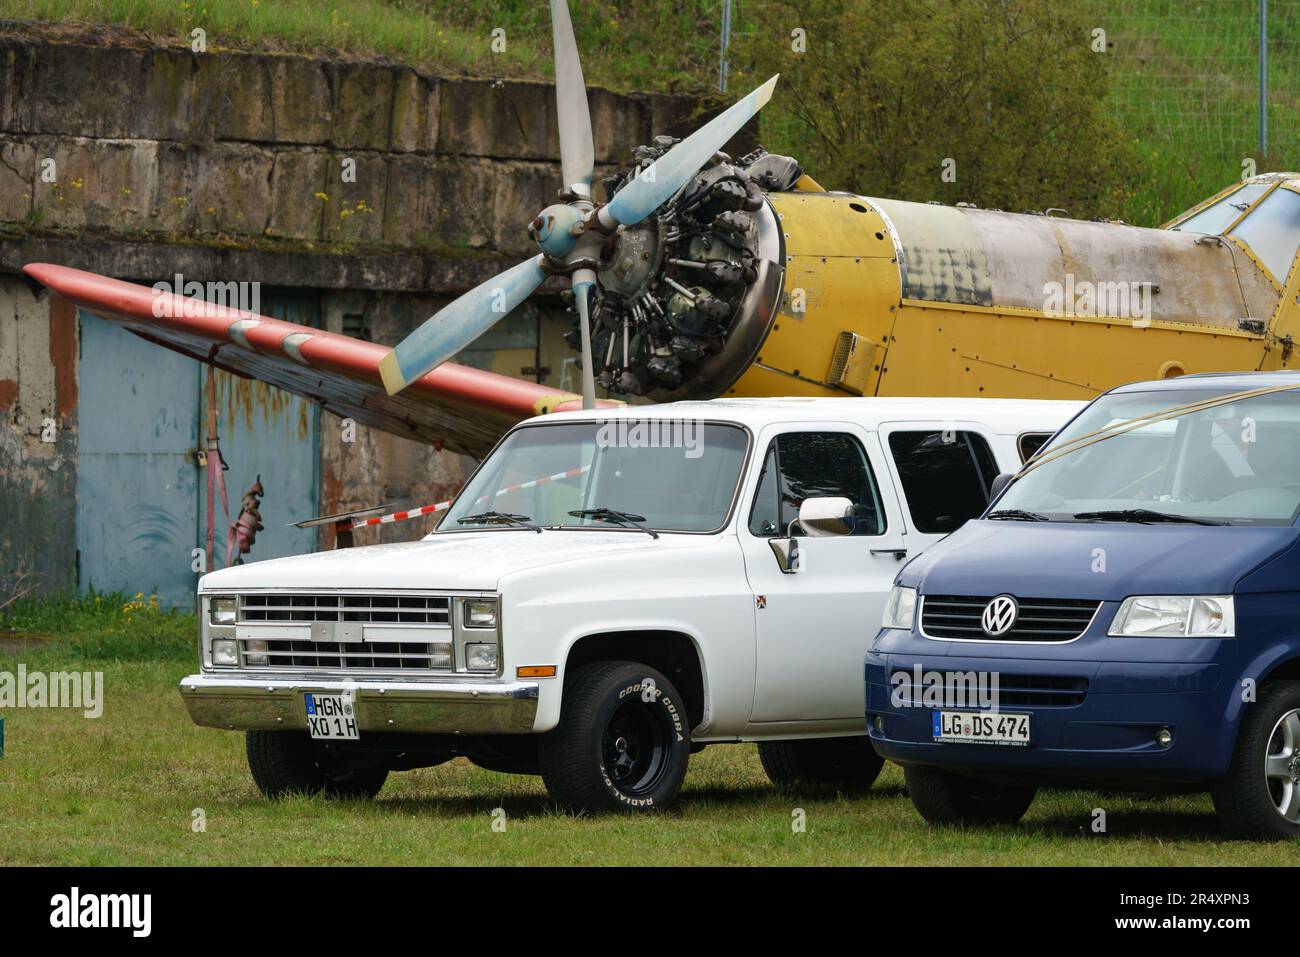 The full-size pickup truck Chevrolet Silverado C10, a modern VW Transporter against the background of the Soviet aircraft Antonov An-2. Stock Photo